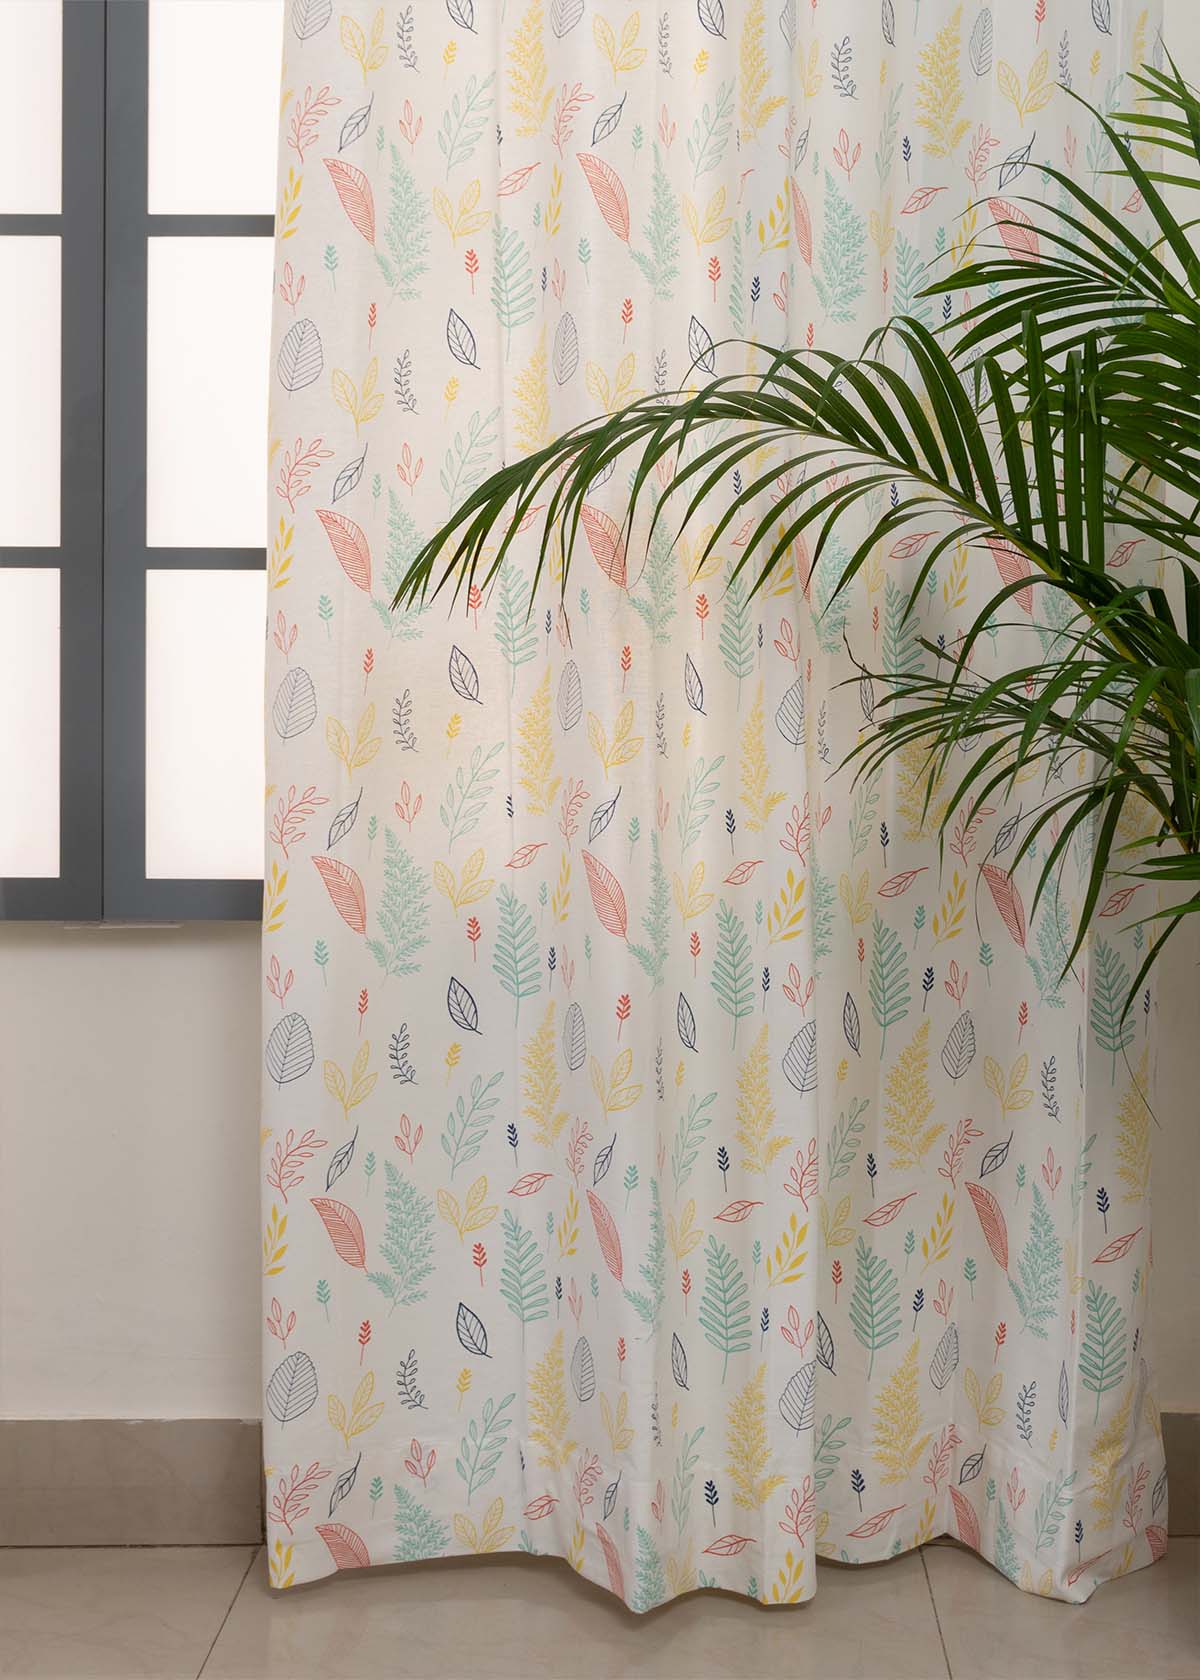 Rustling Leaves 100% Customizable Cotton floral curtain for bed room - Room darkening - Multicolor